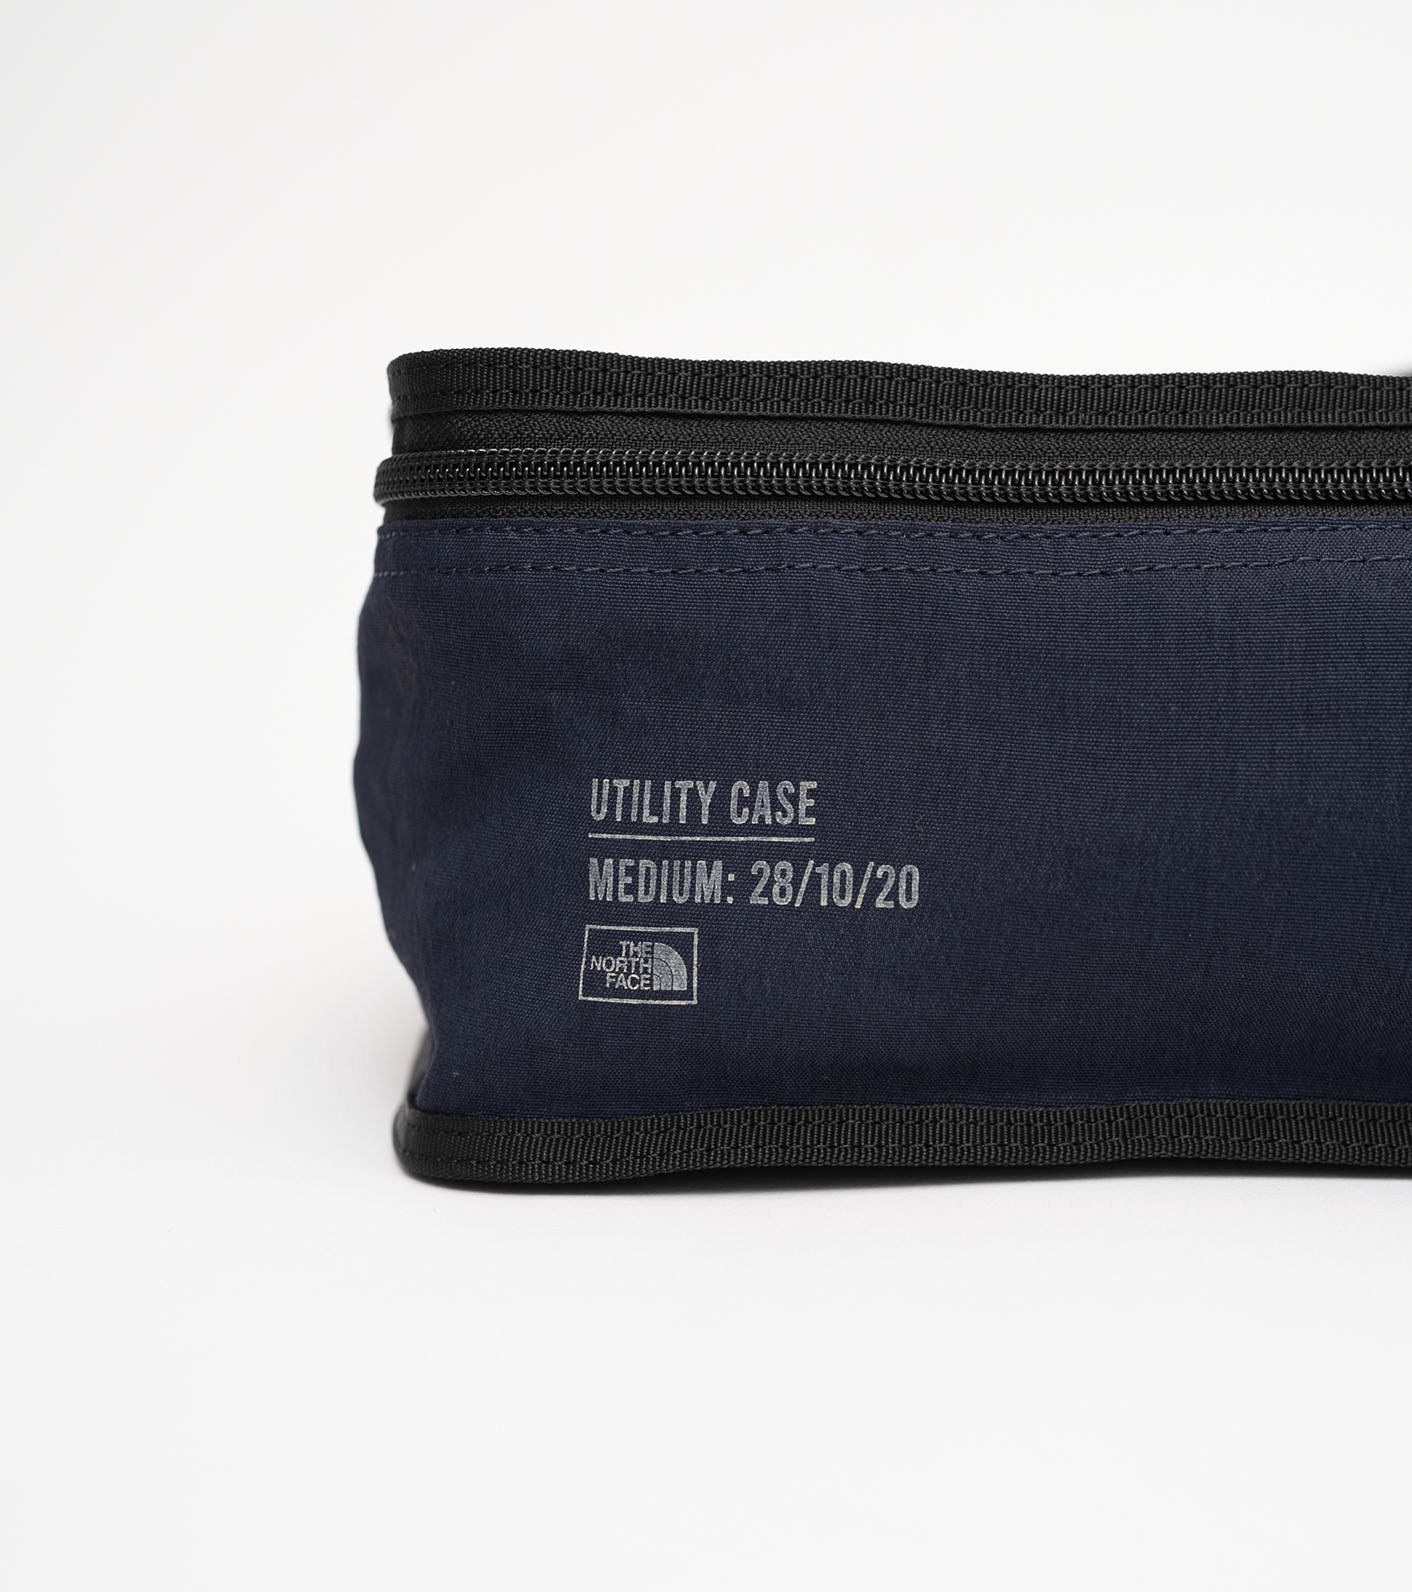 THE NORTH FACE UTILITY CASE